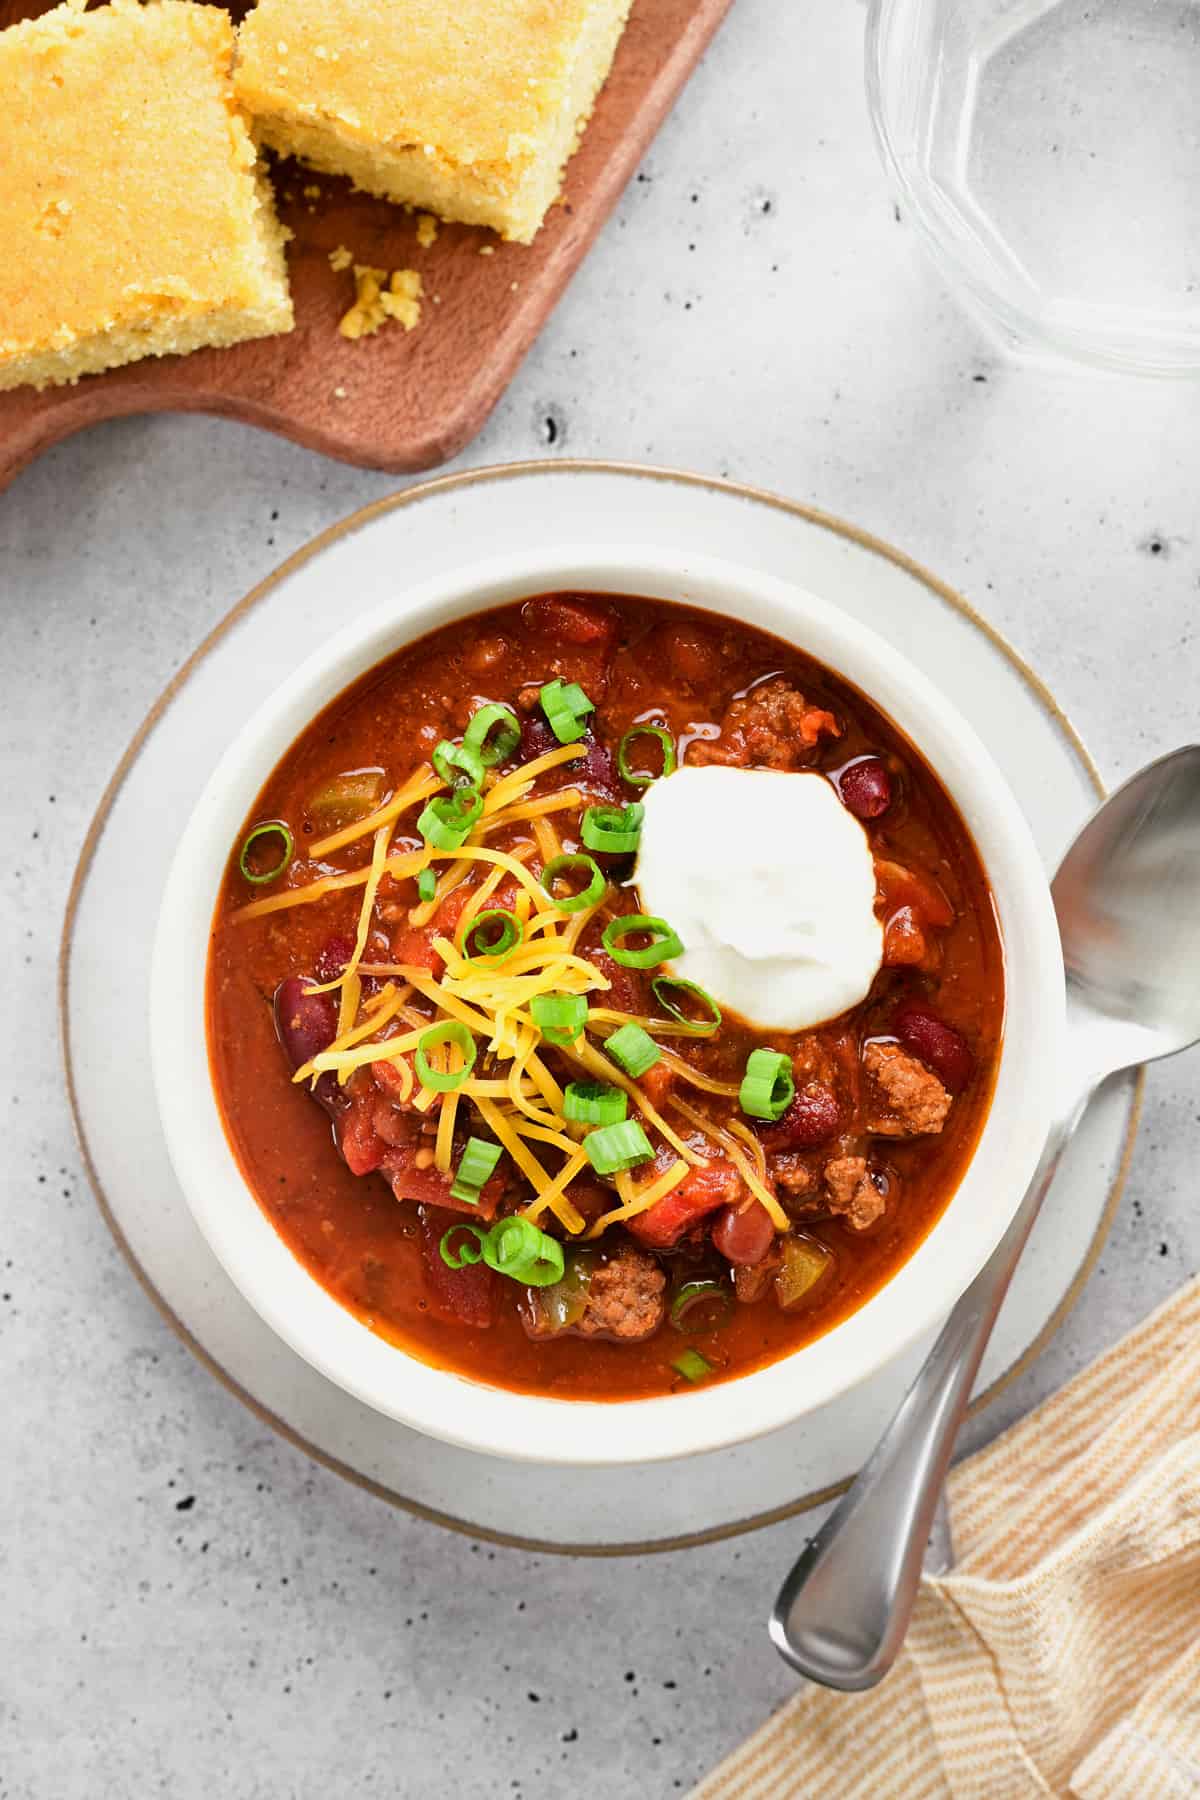 a bowl of chili, cornbread on a cutting board and a glass of water.